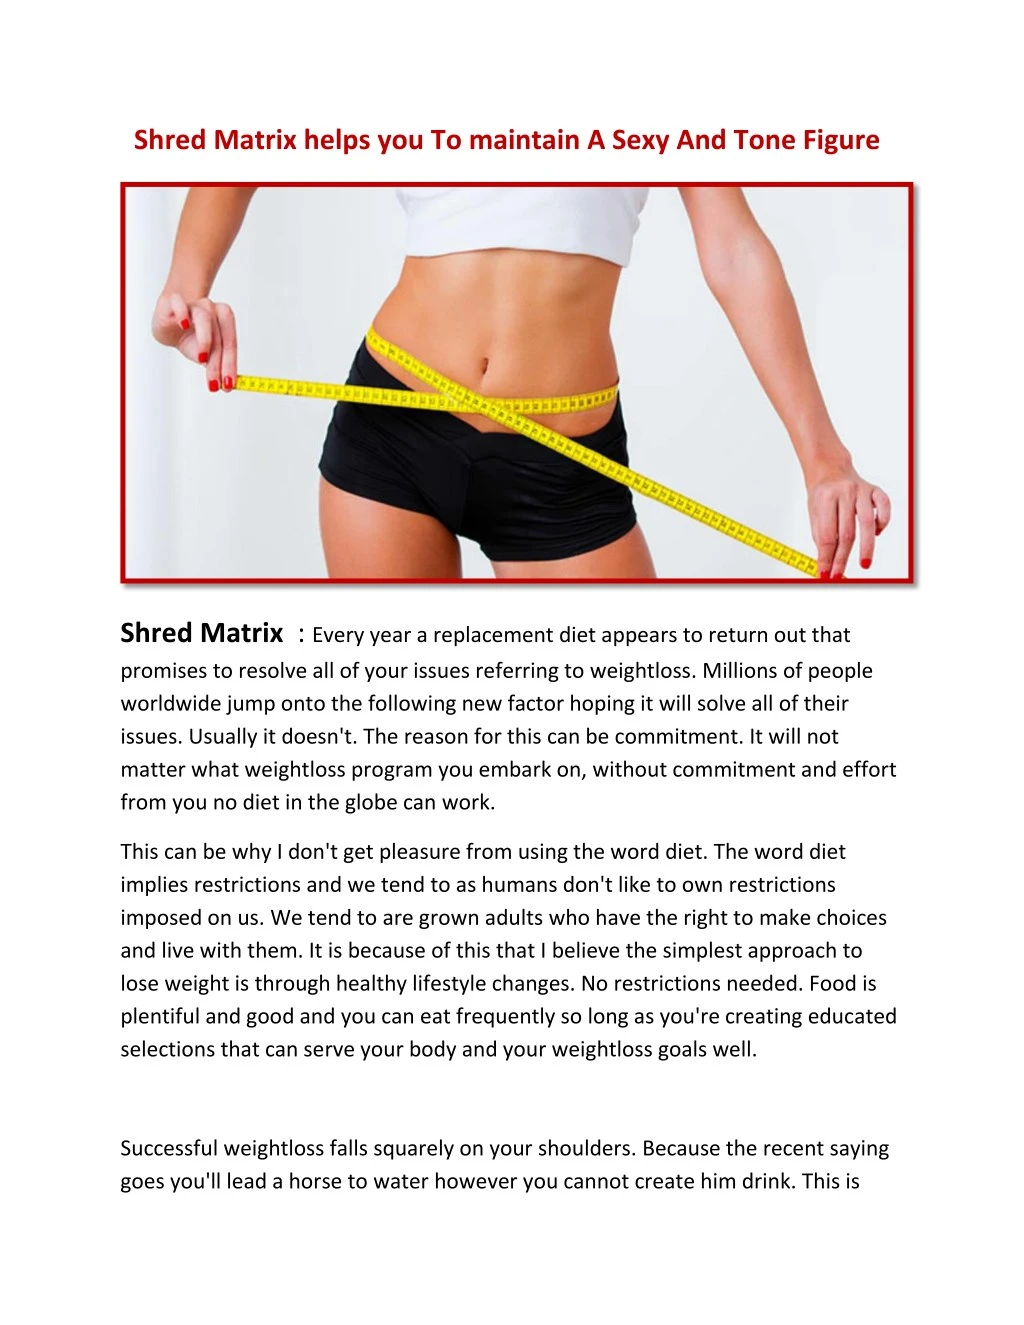 shred matrix helps you to maintain a sexy